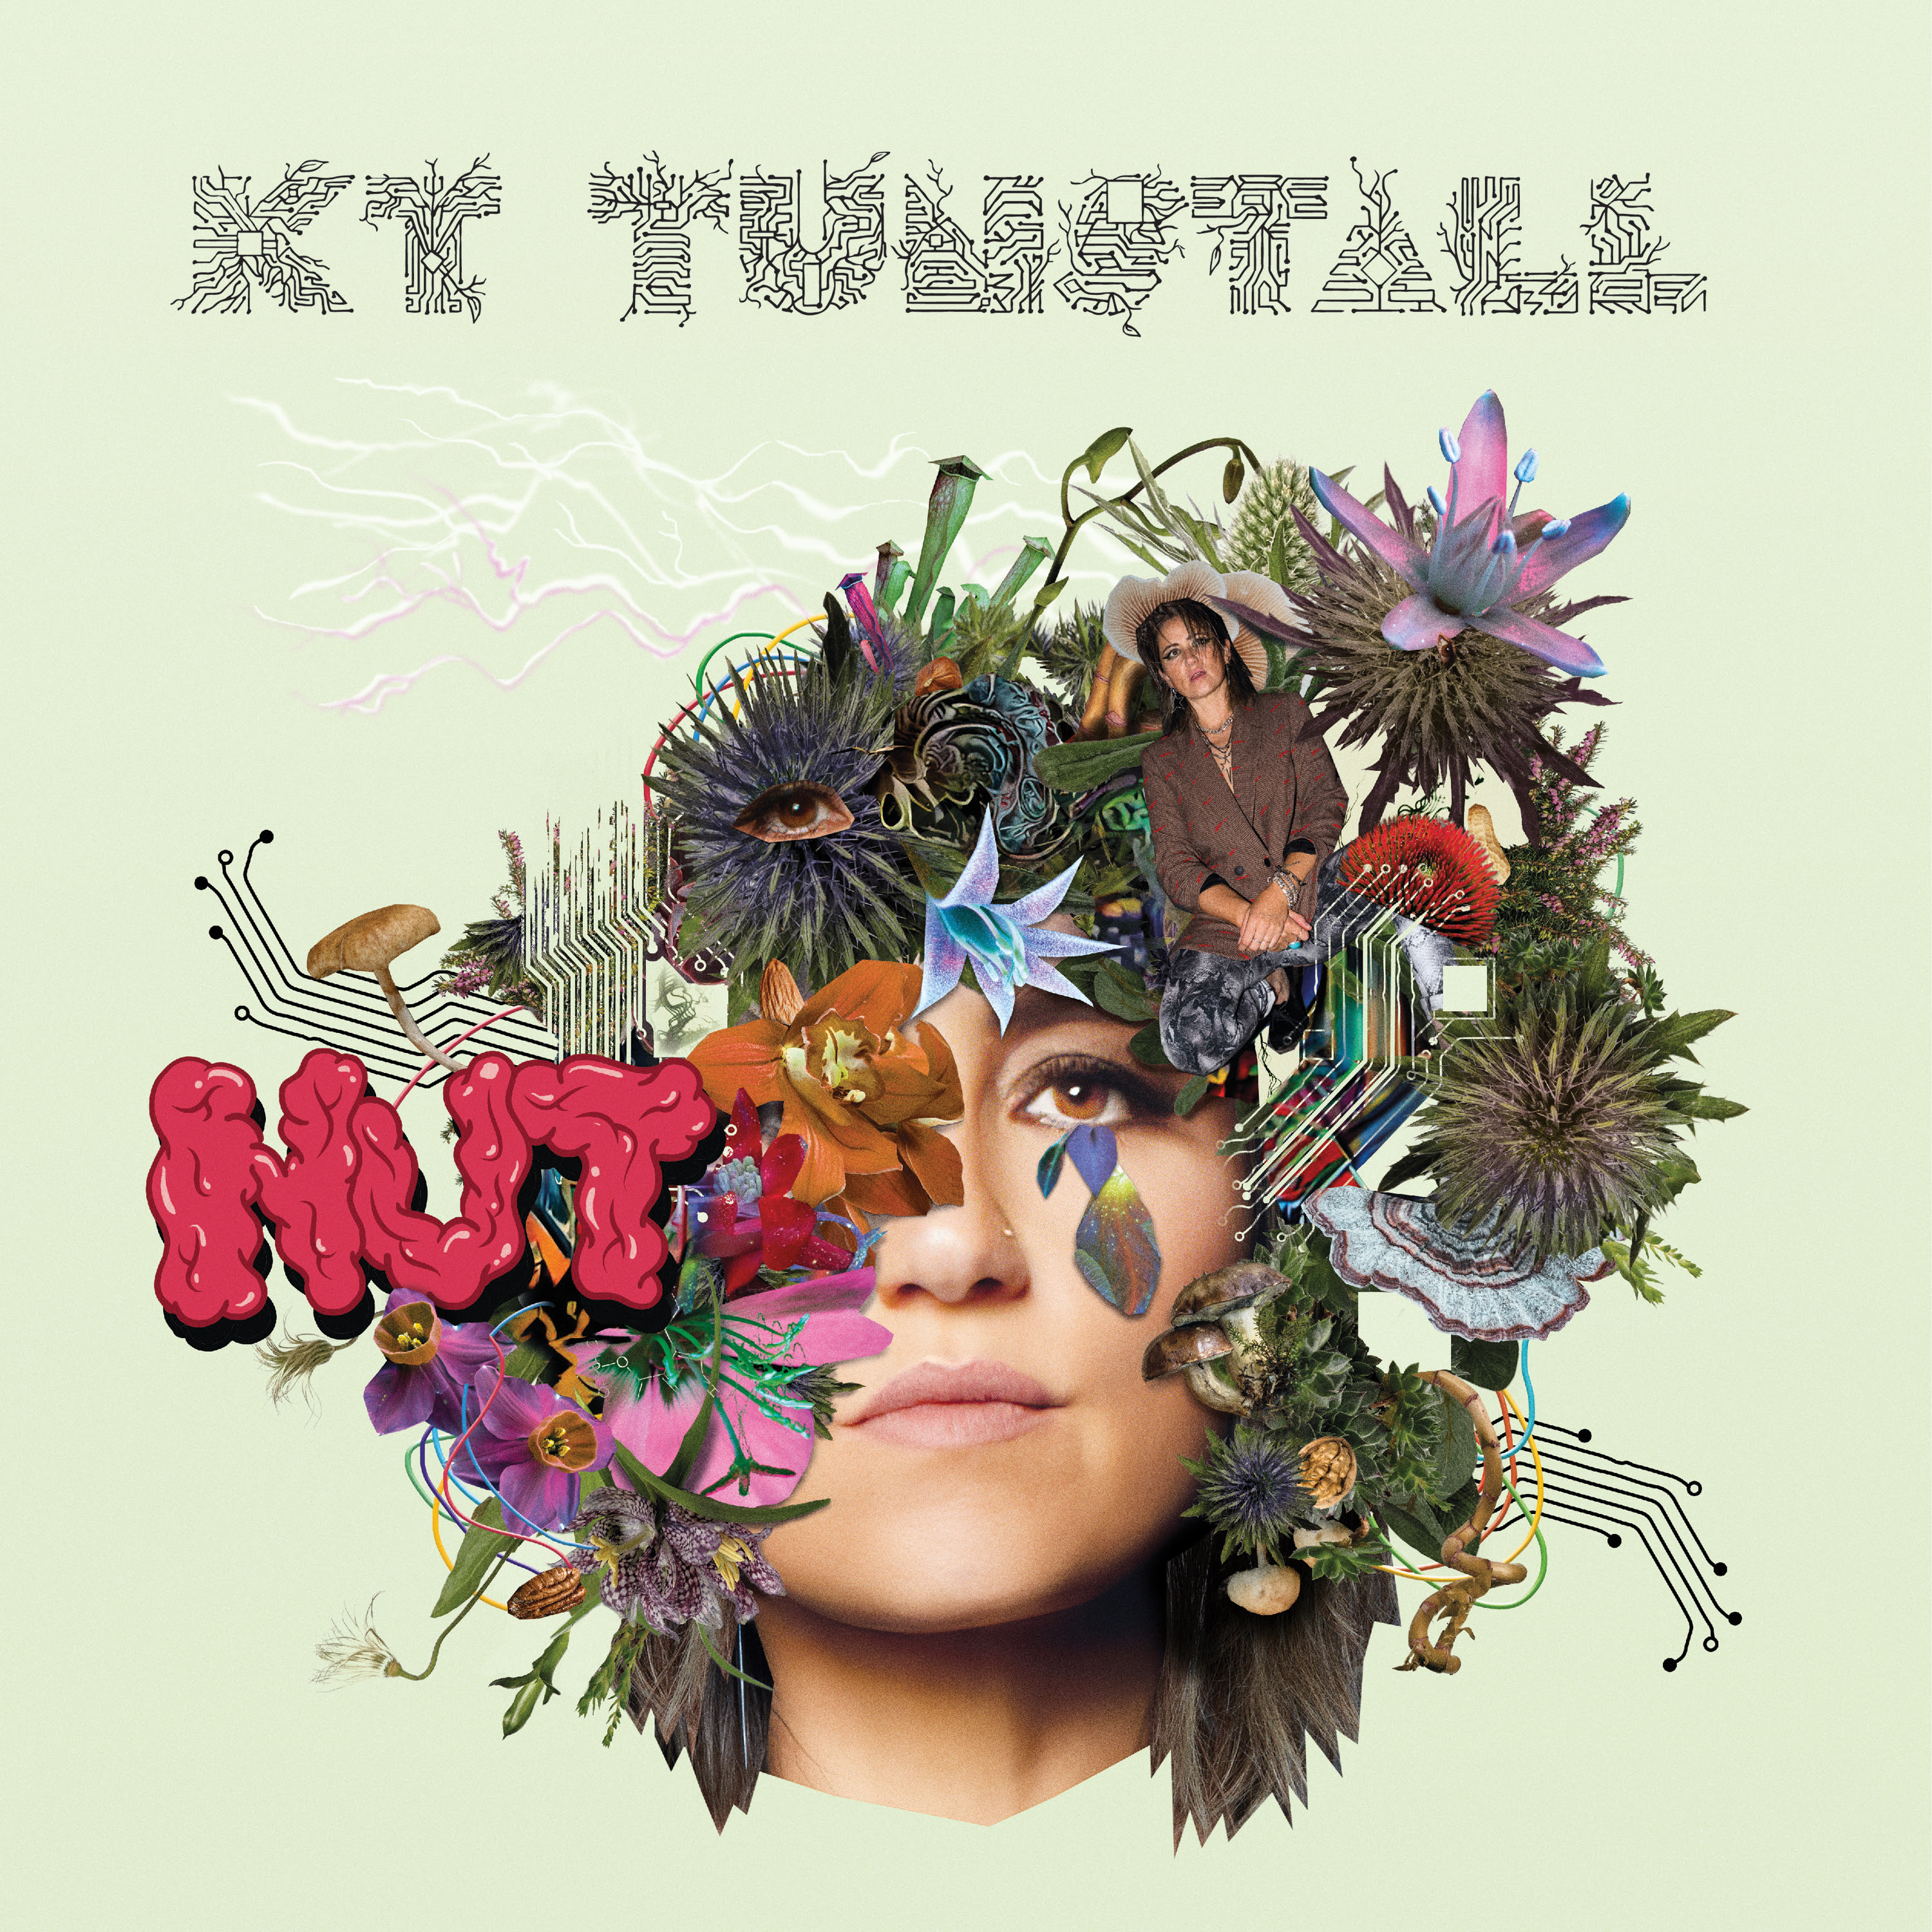 KT TUNSTALL Announces New Album ~NUT~ First Single Out Today!